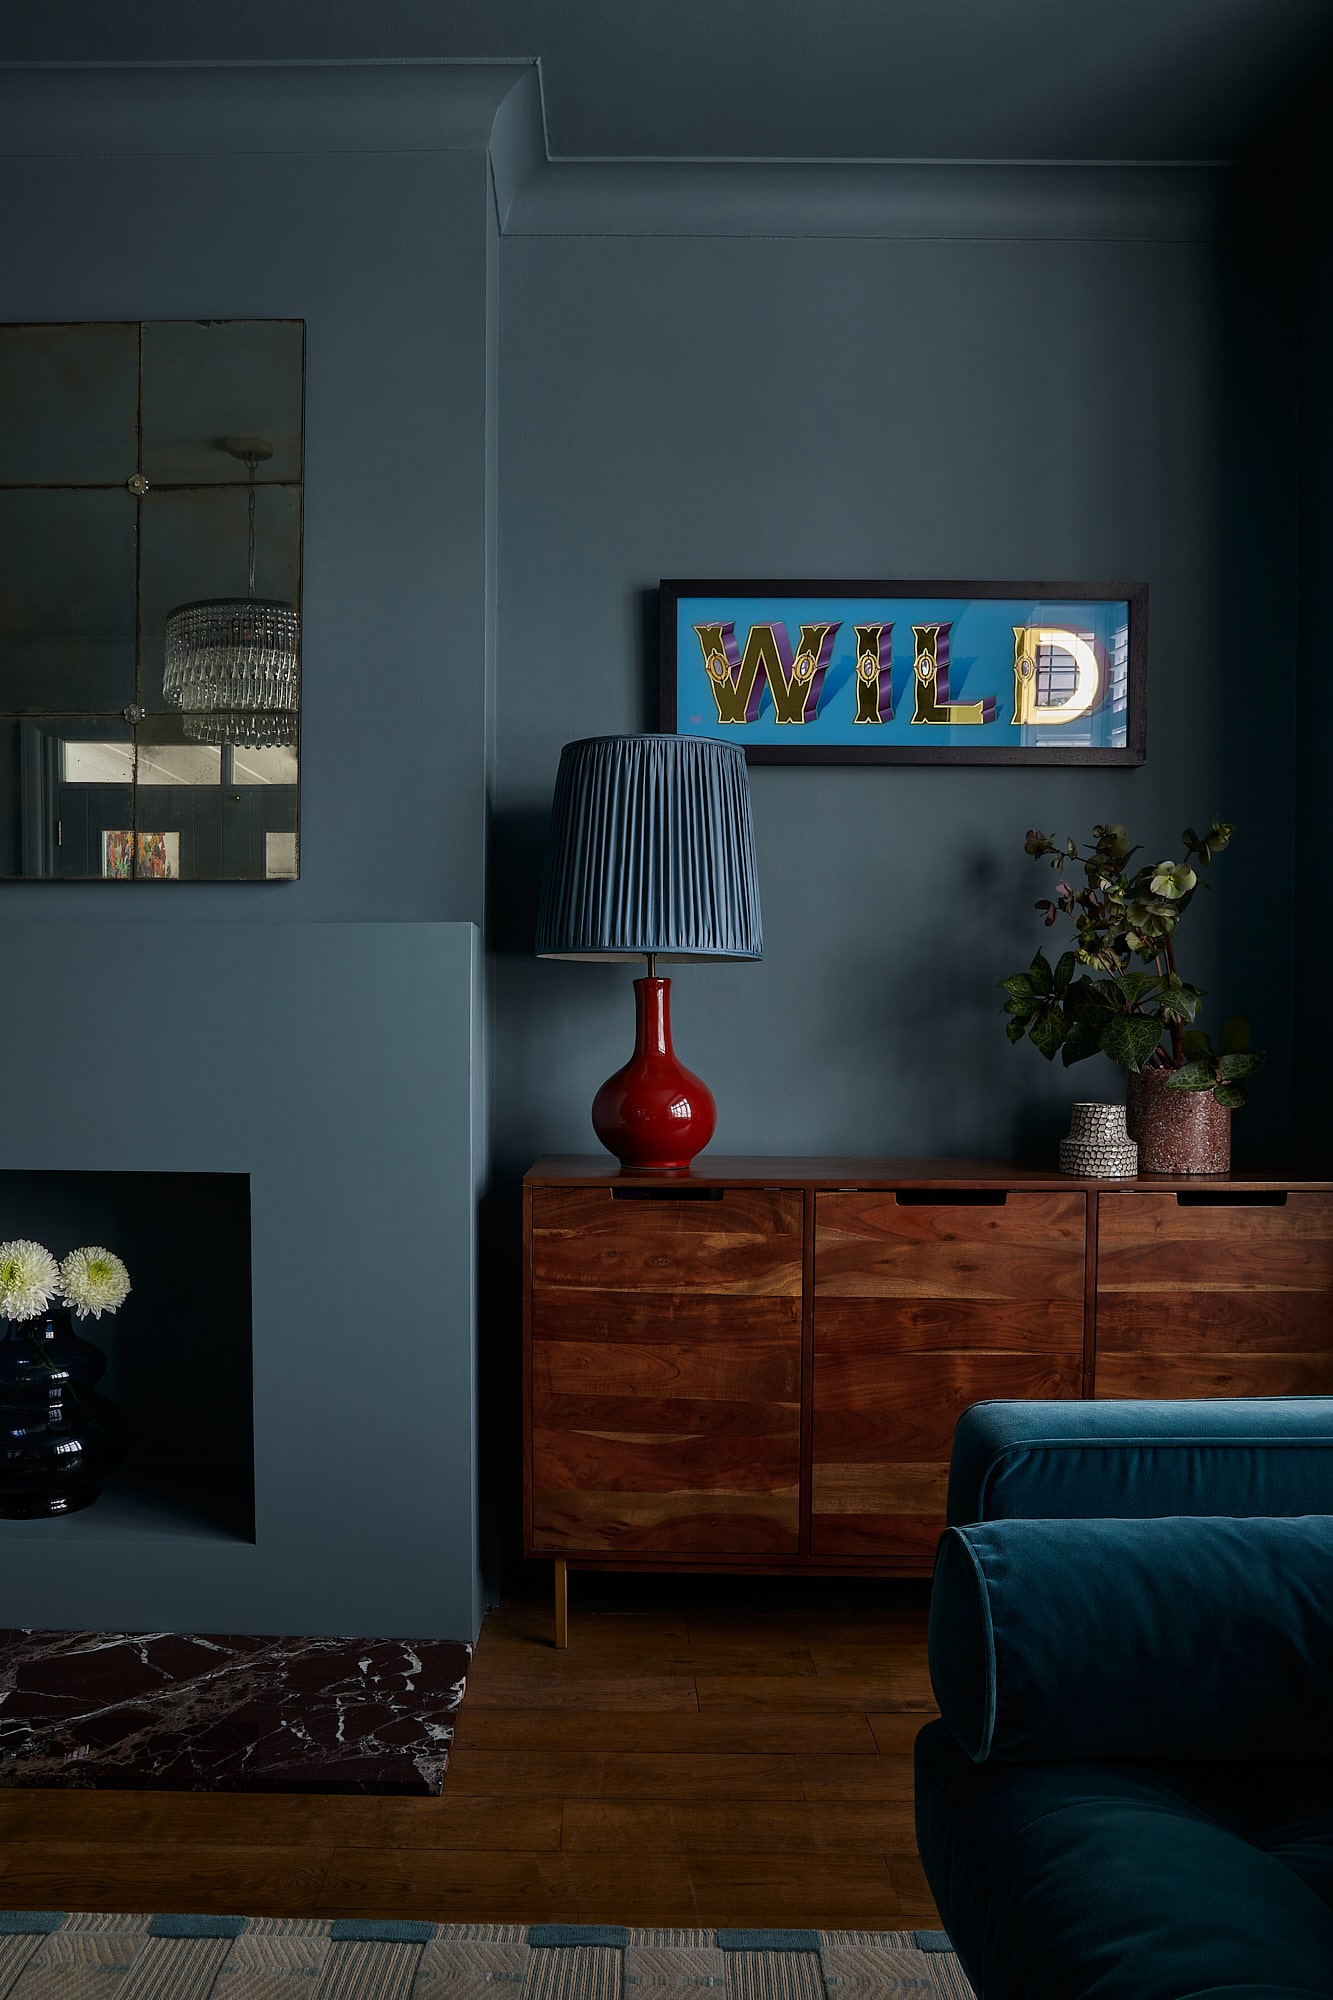 moody dark sitting room with grey blue walls and ceiling